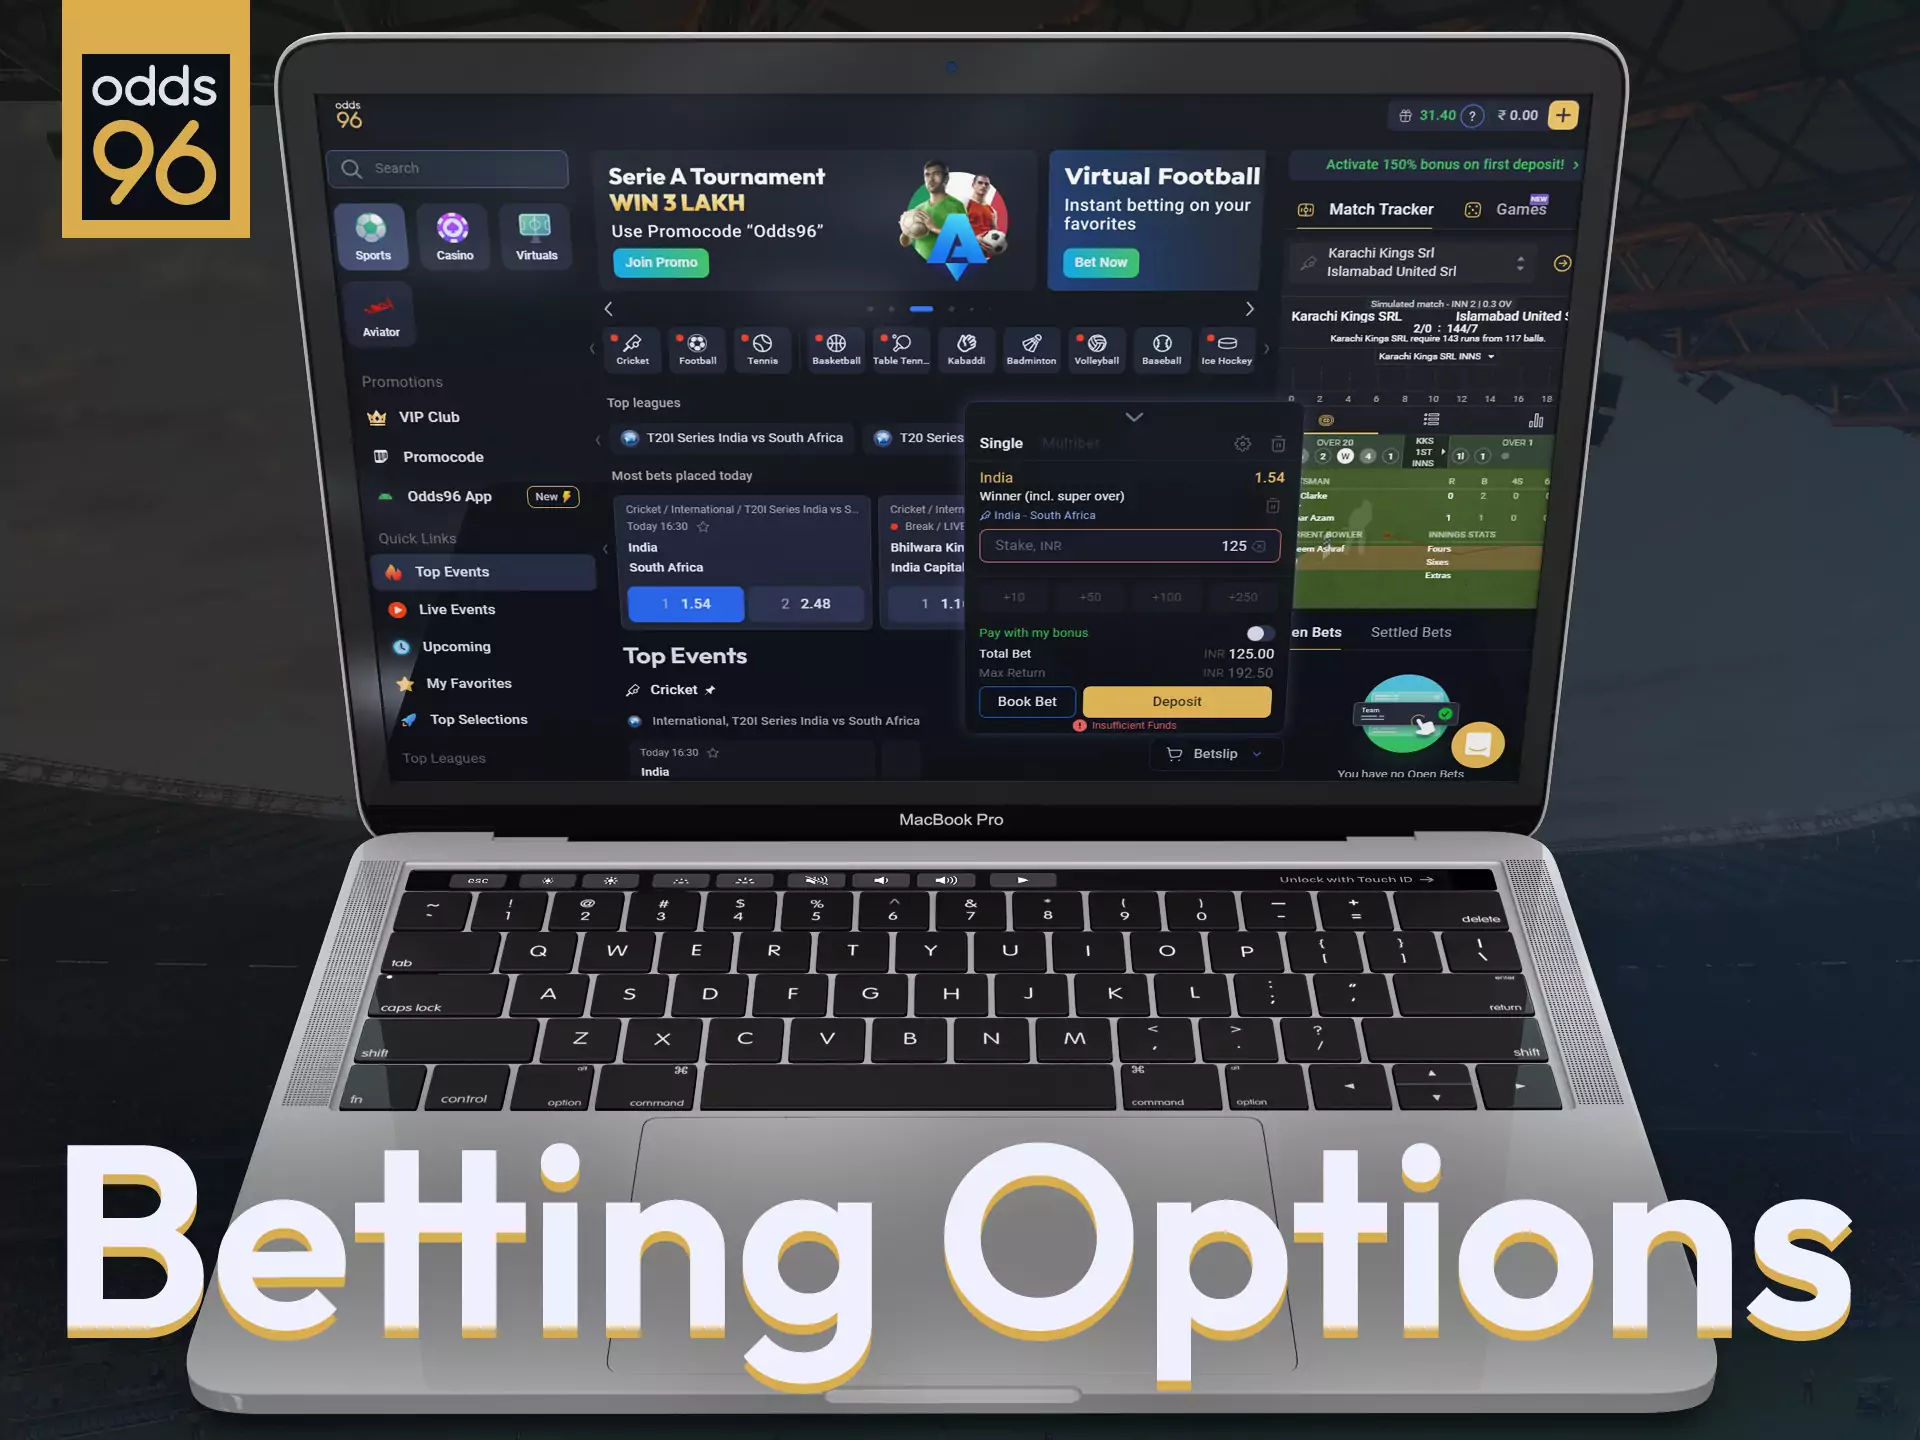 Explore all the betting options for sports and casino in Odds96.